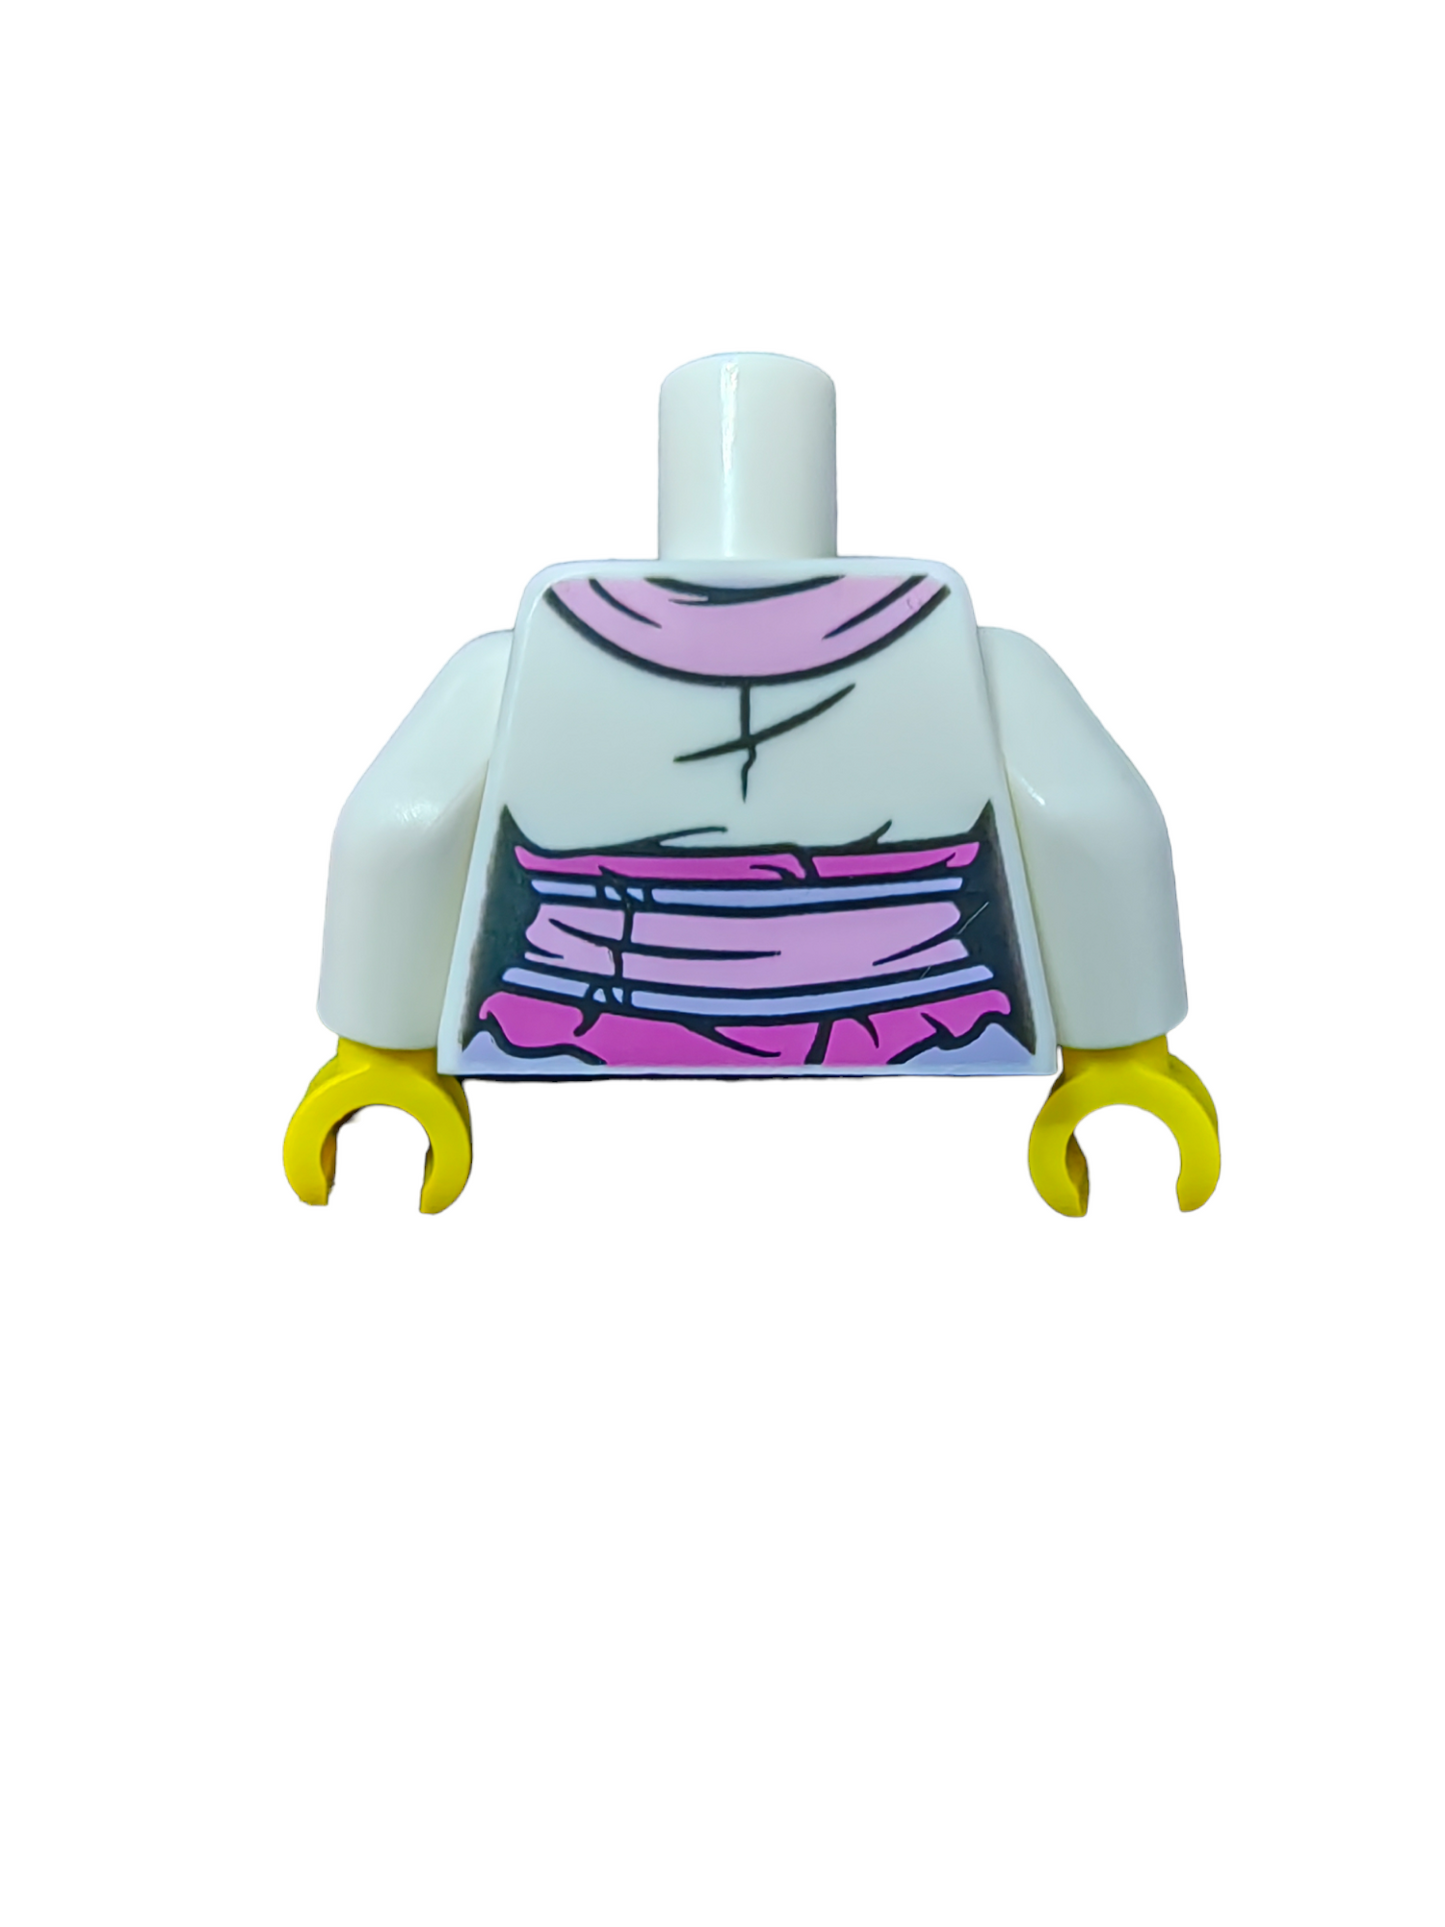 LEGO Torso, Robe with Bright Pink and Dark Pink Bow with Lavender - UB1094